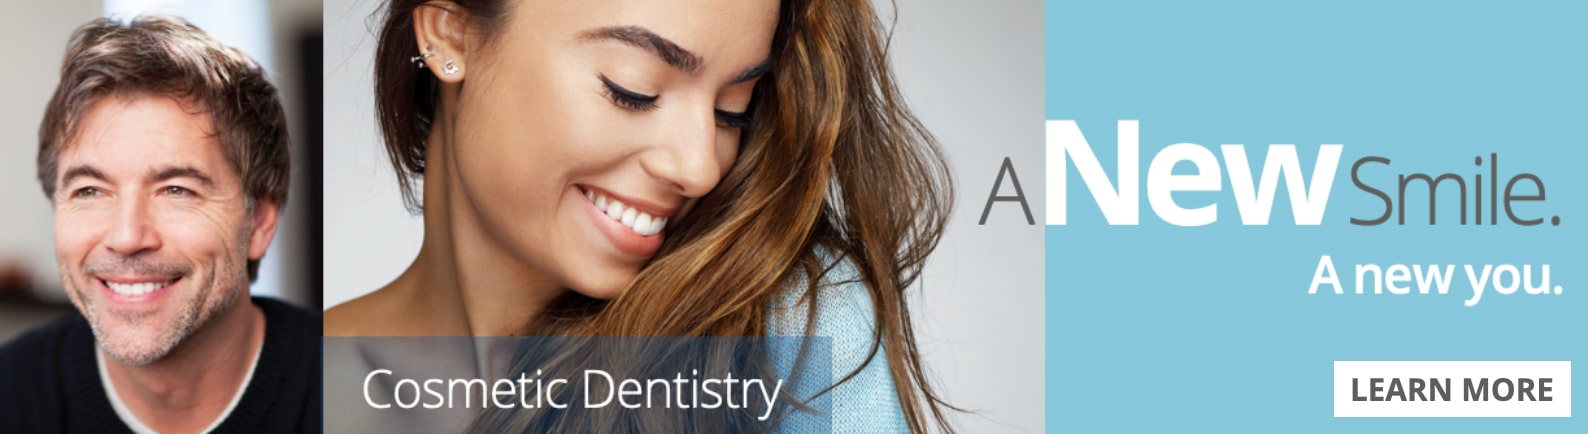 cosmetic dentistry learn more